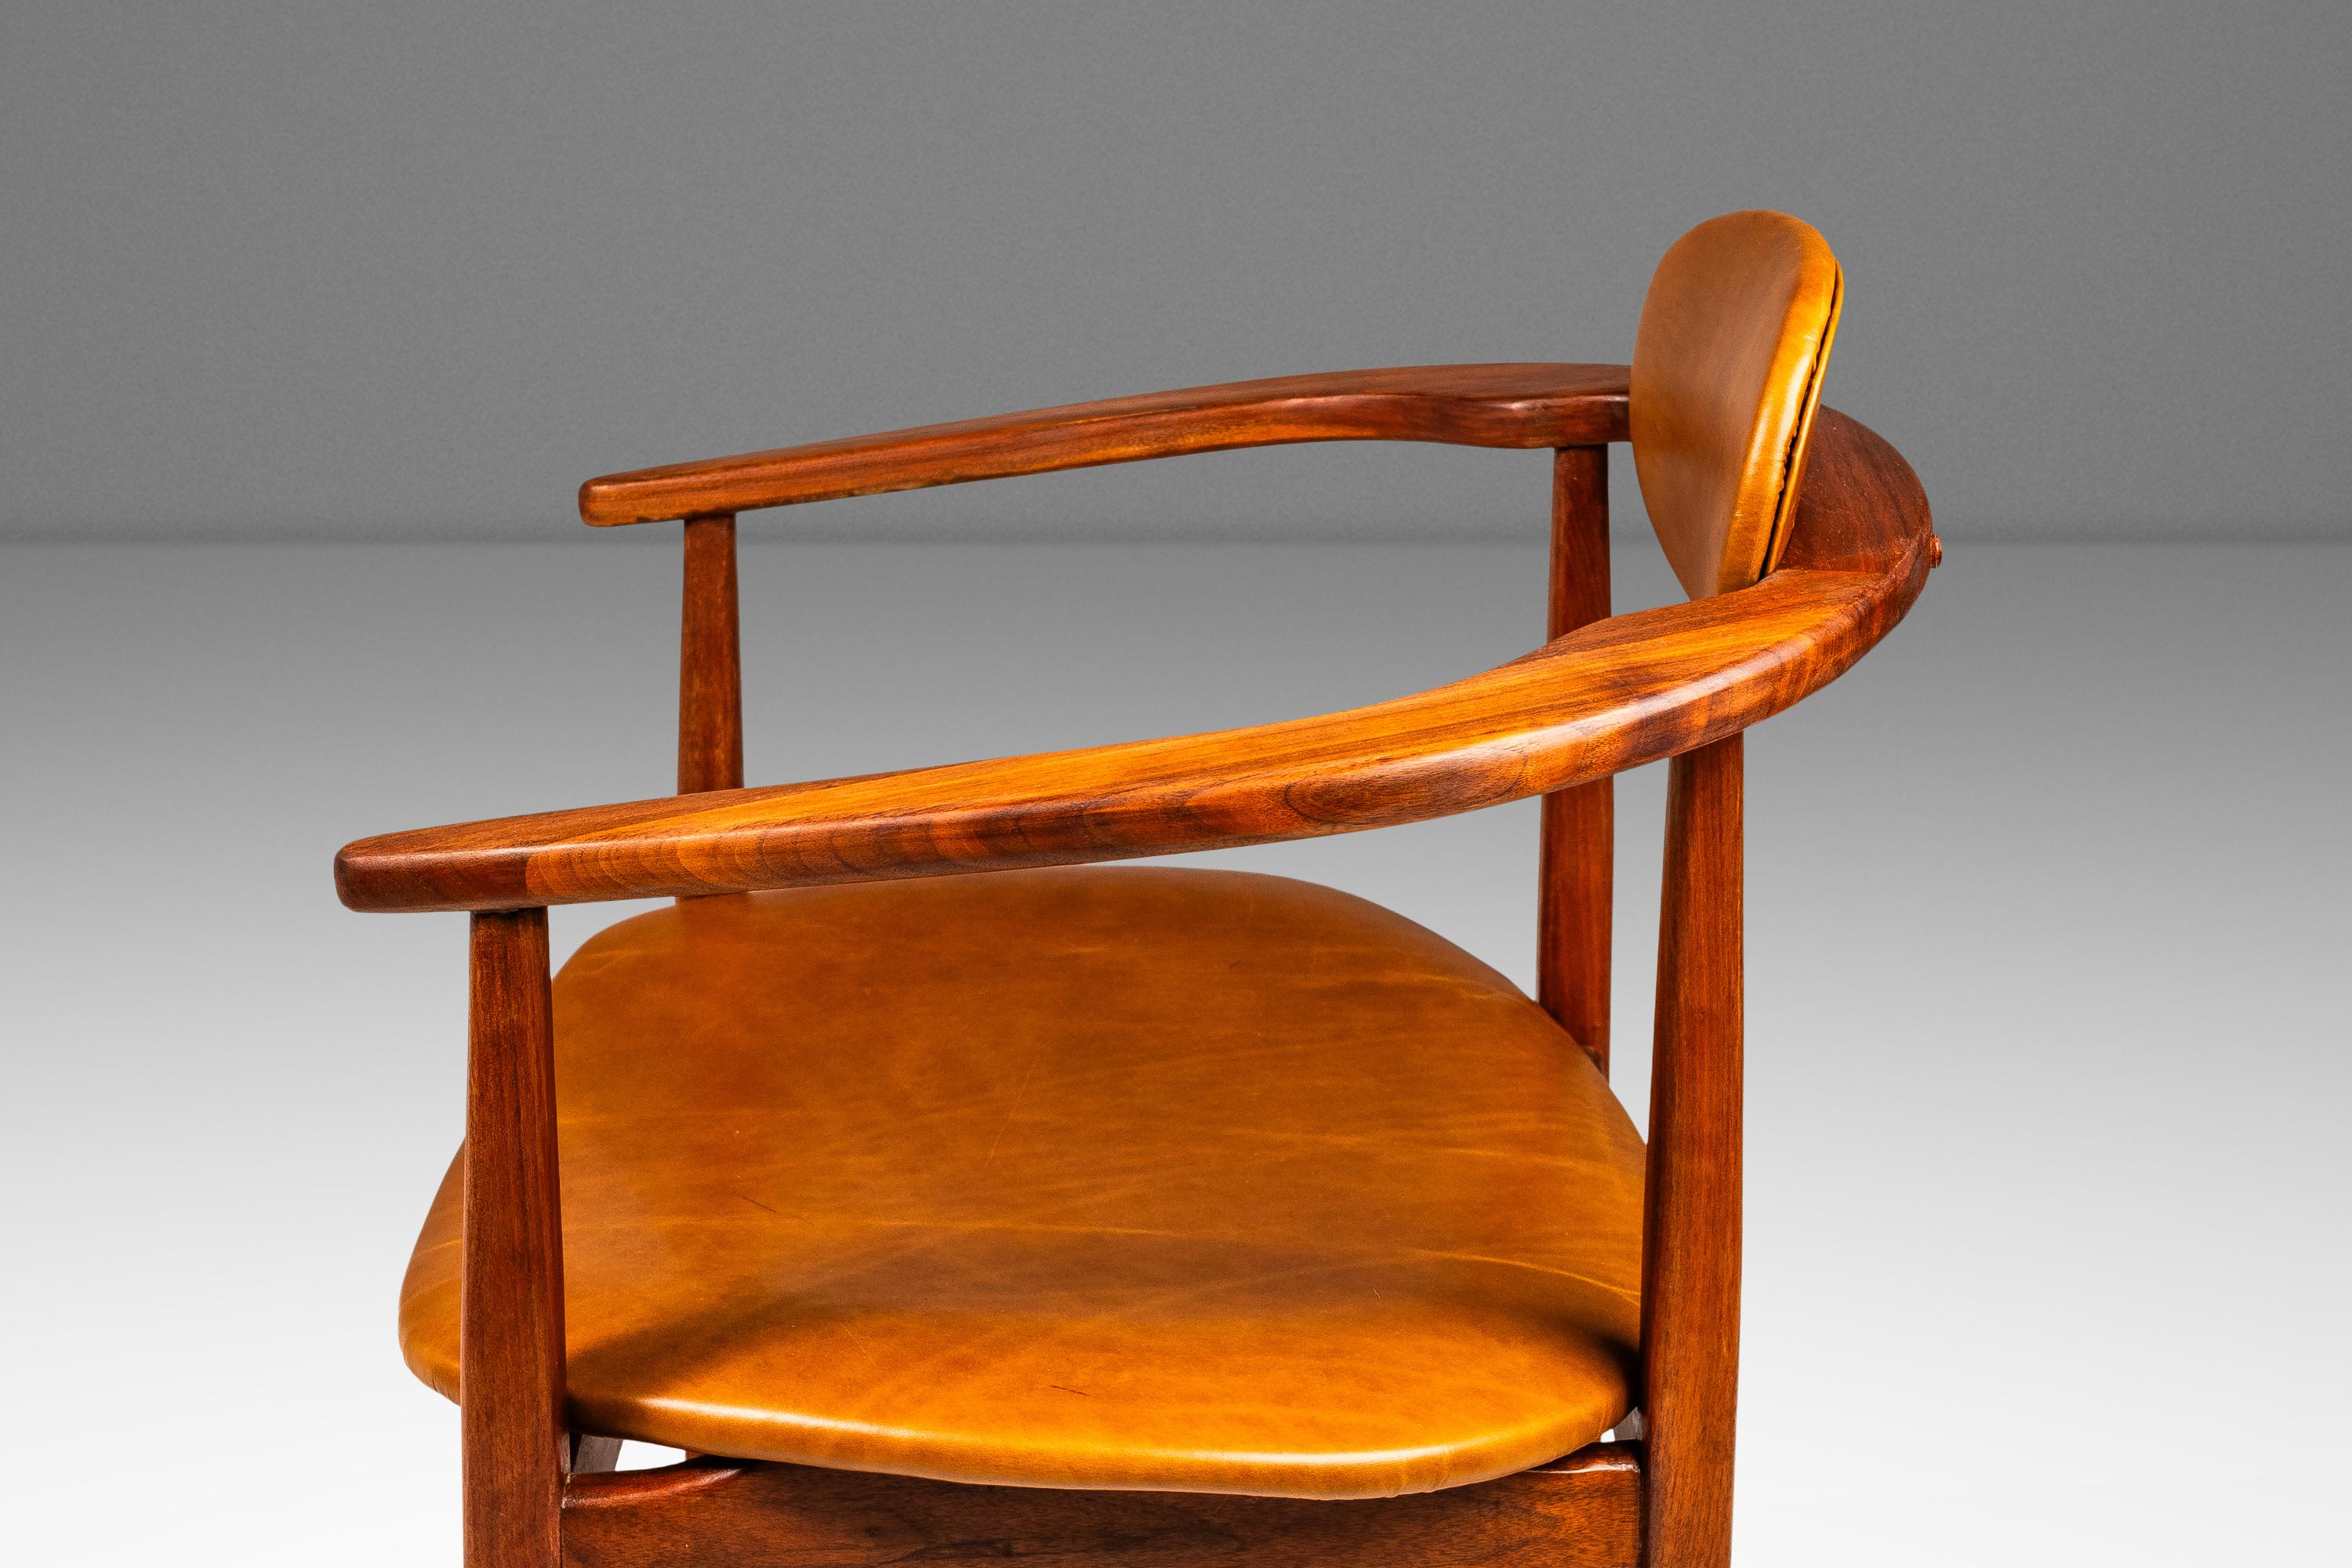 Set of 2 Sculptural Lounge Chairs, Leather & Walnut, Adrian Pearsall Style, 1960 For Sale 10